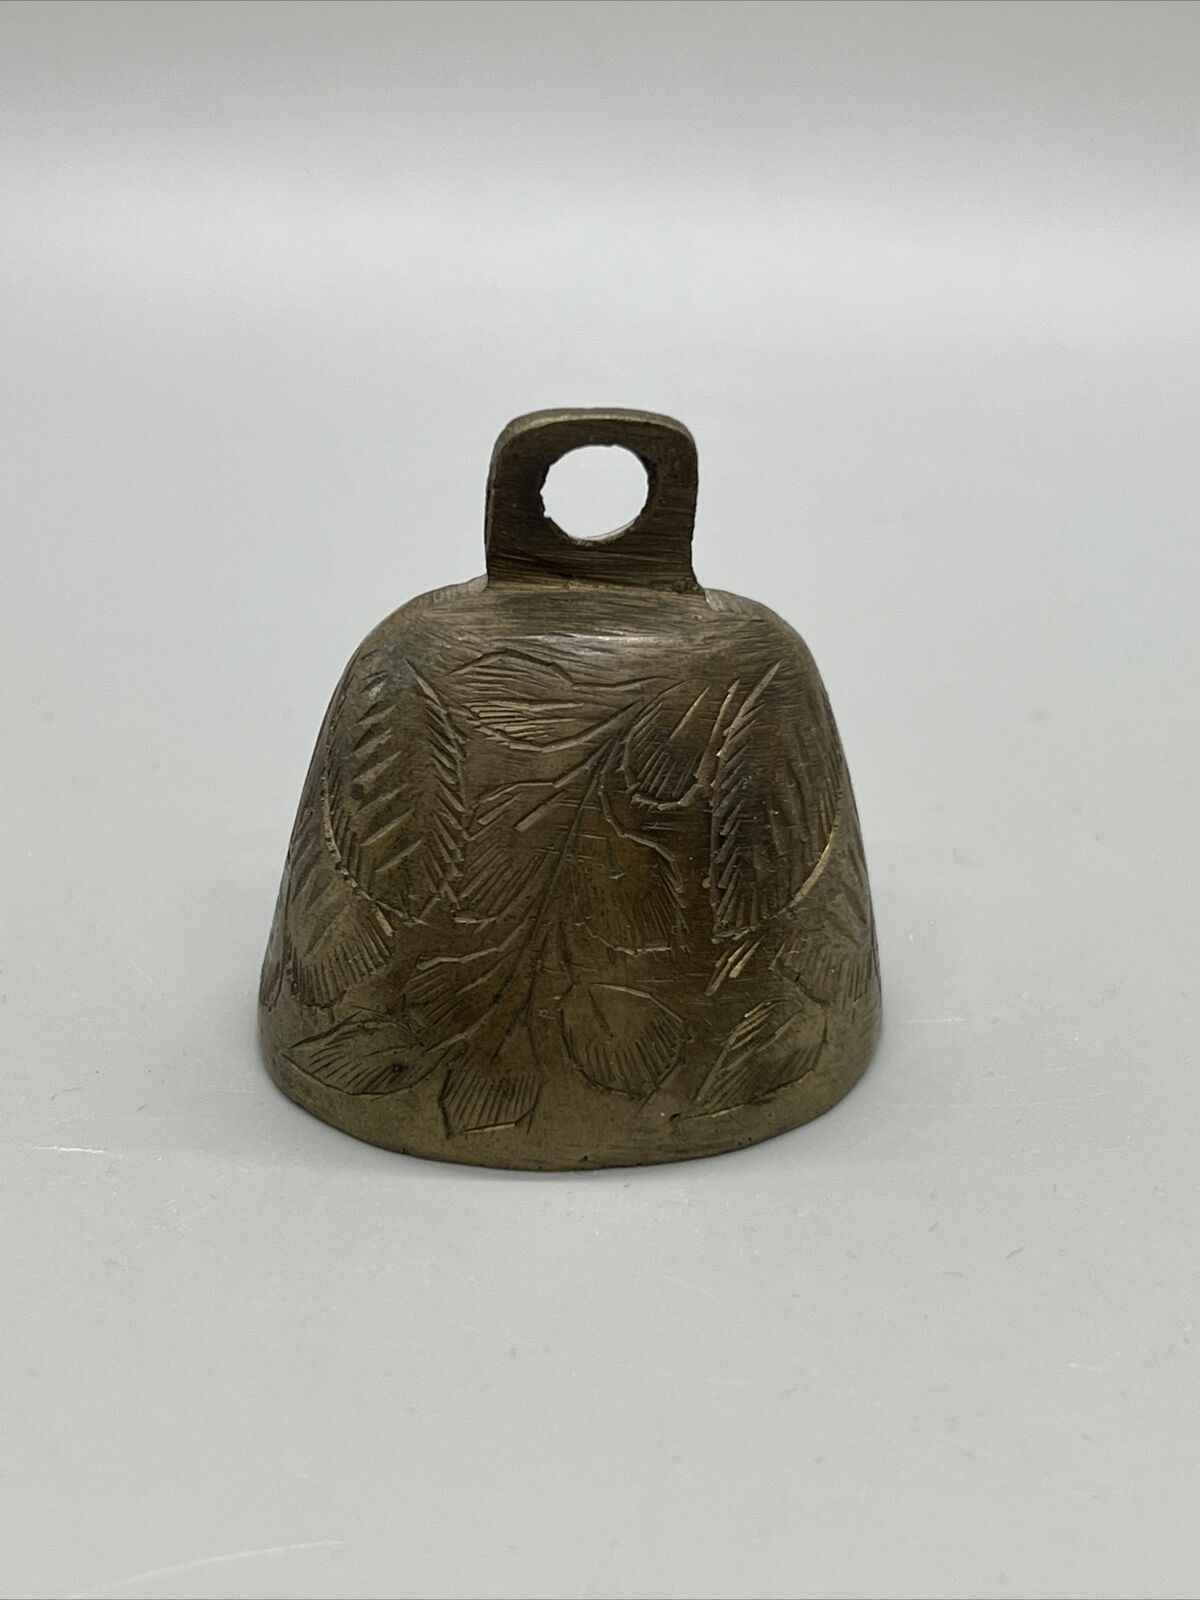 BELLS OF SARNA INDIA SMALL BRASS BELL ENGRAVED WITH LEAVES 1.75” Etched